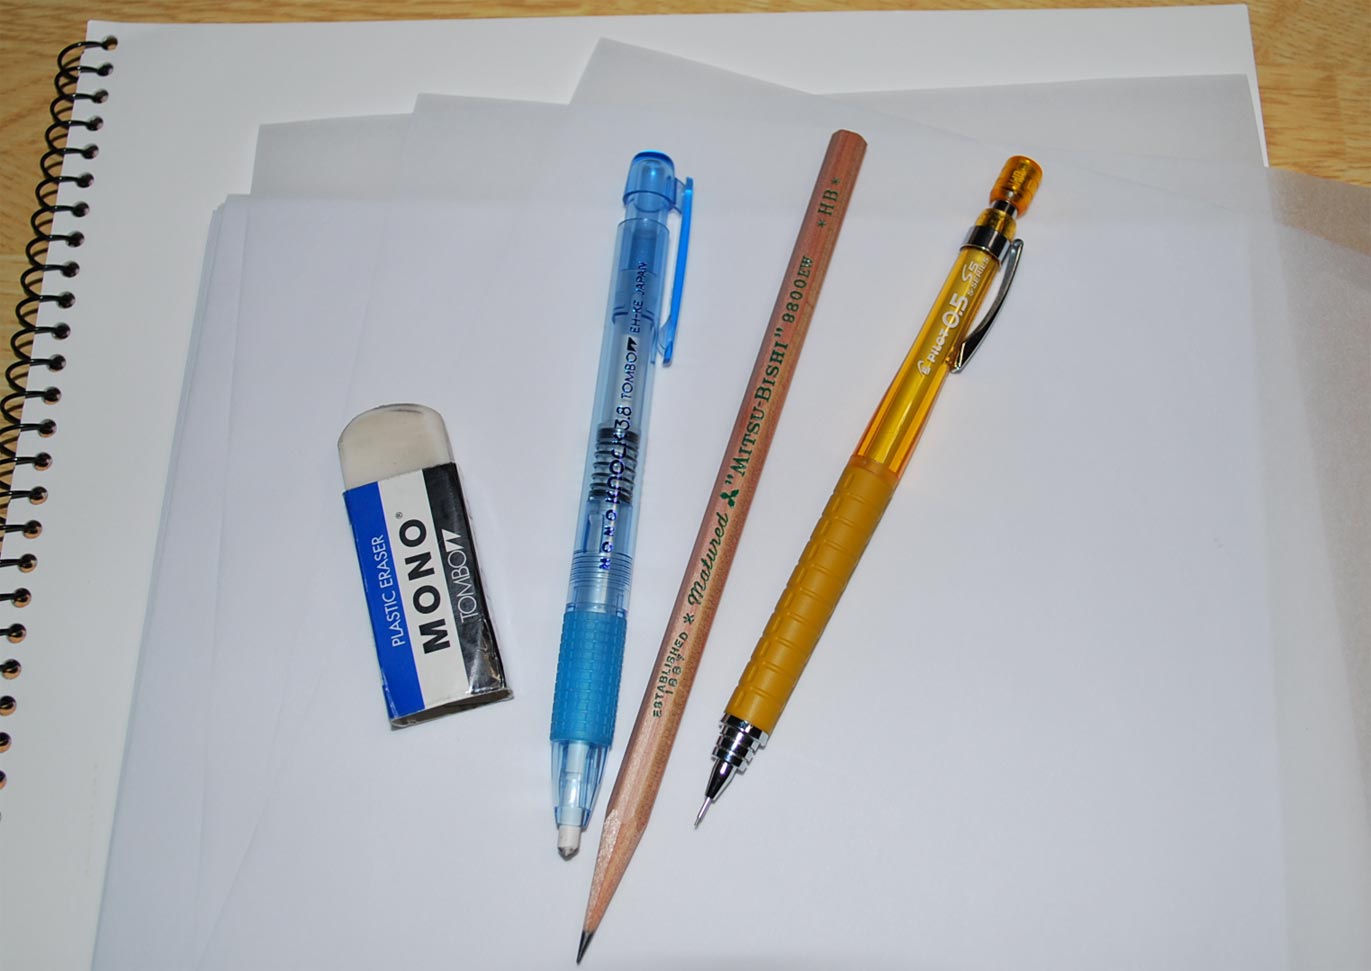 Basic Drawing Tools You Need for Your Drawings